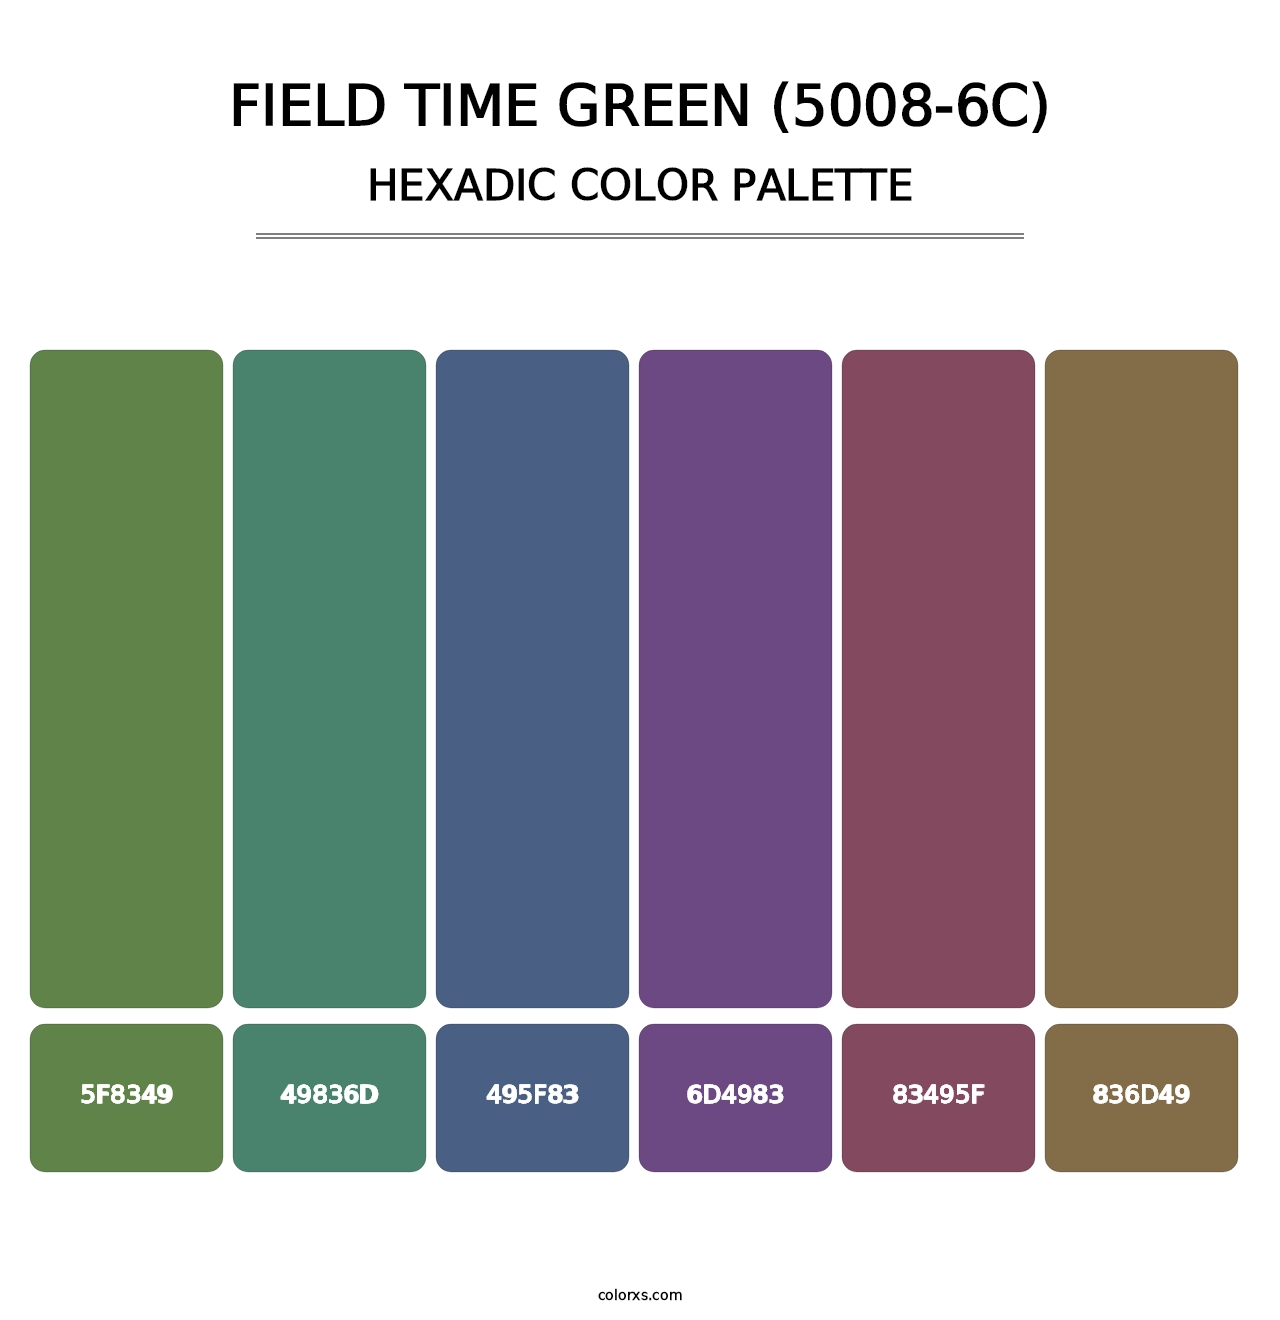 Field Time Green (5008-6C) - Hexadic Color Palette